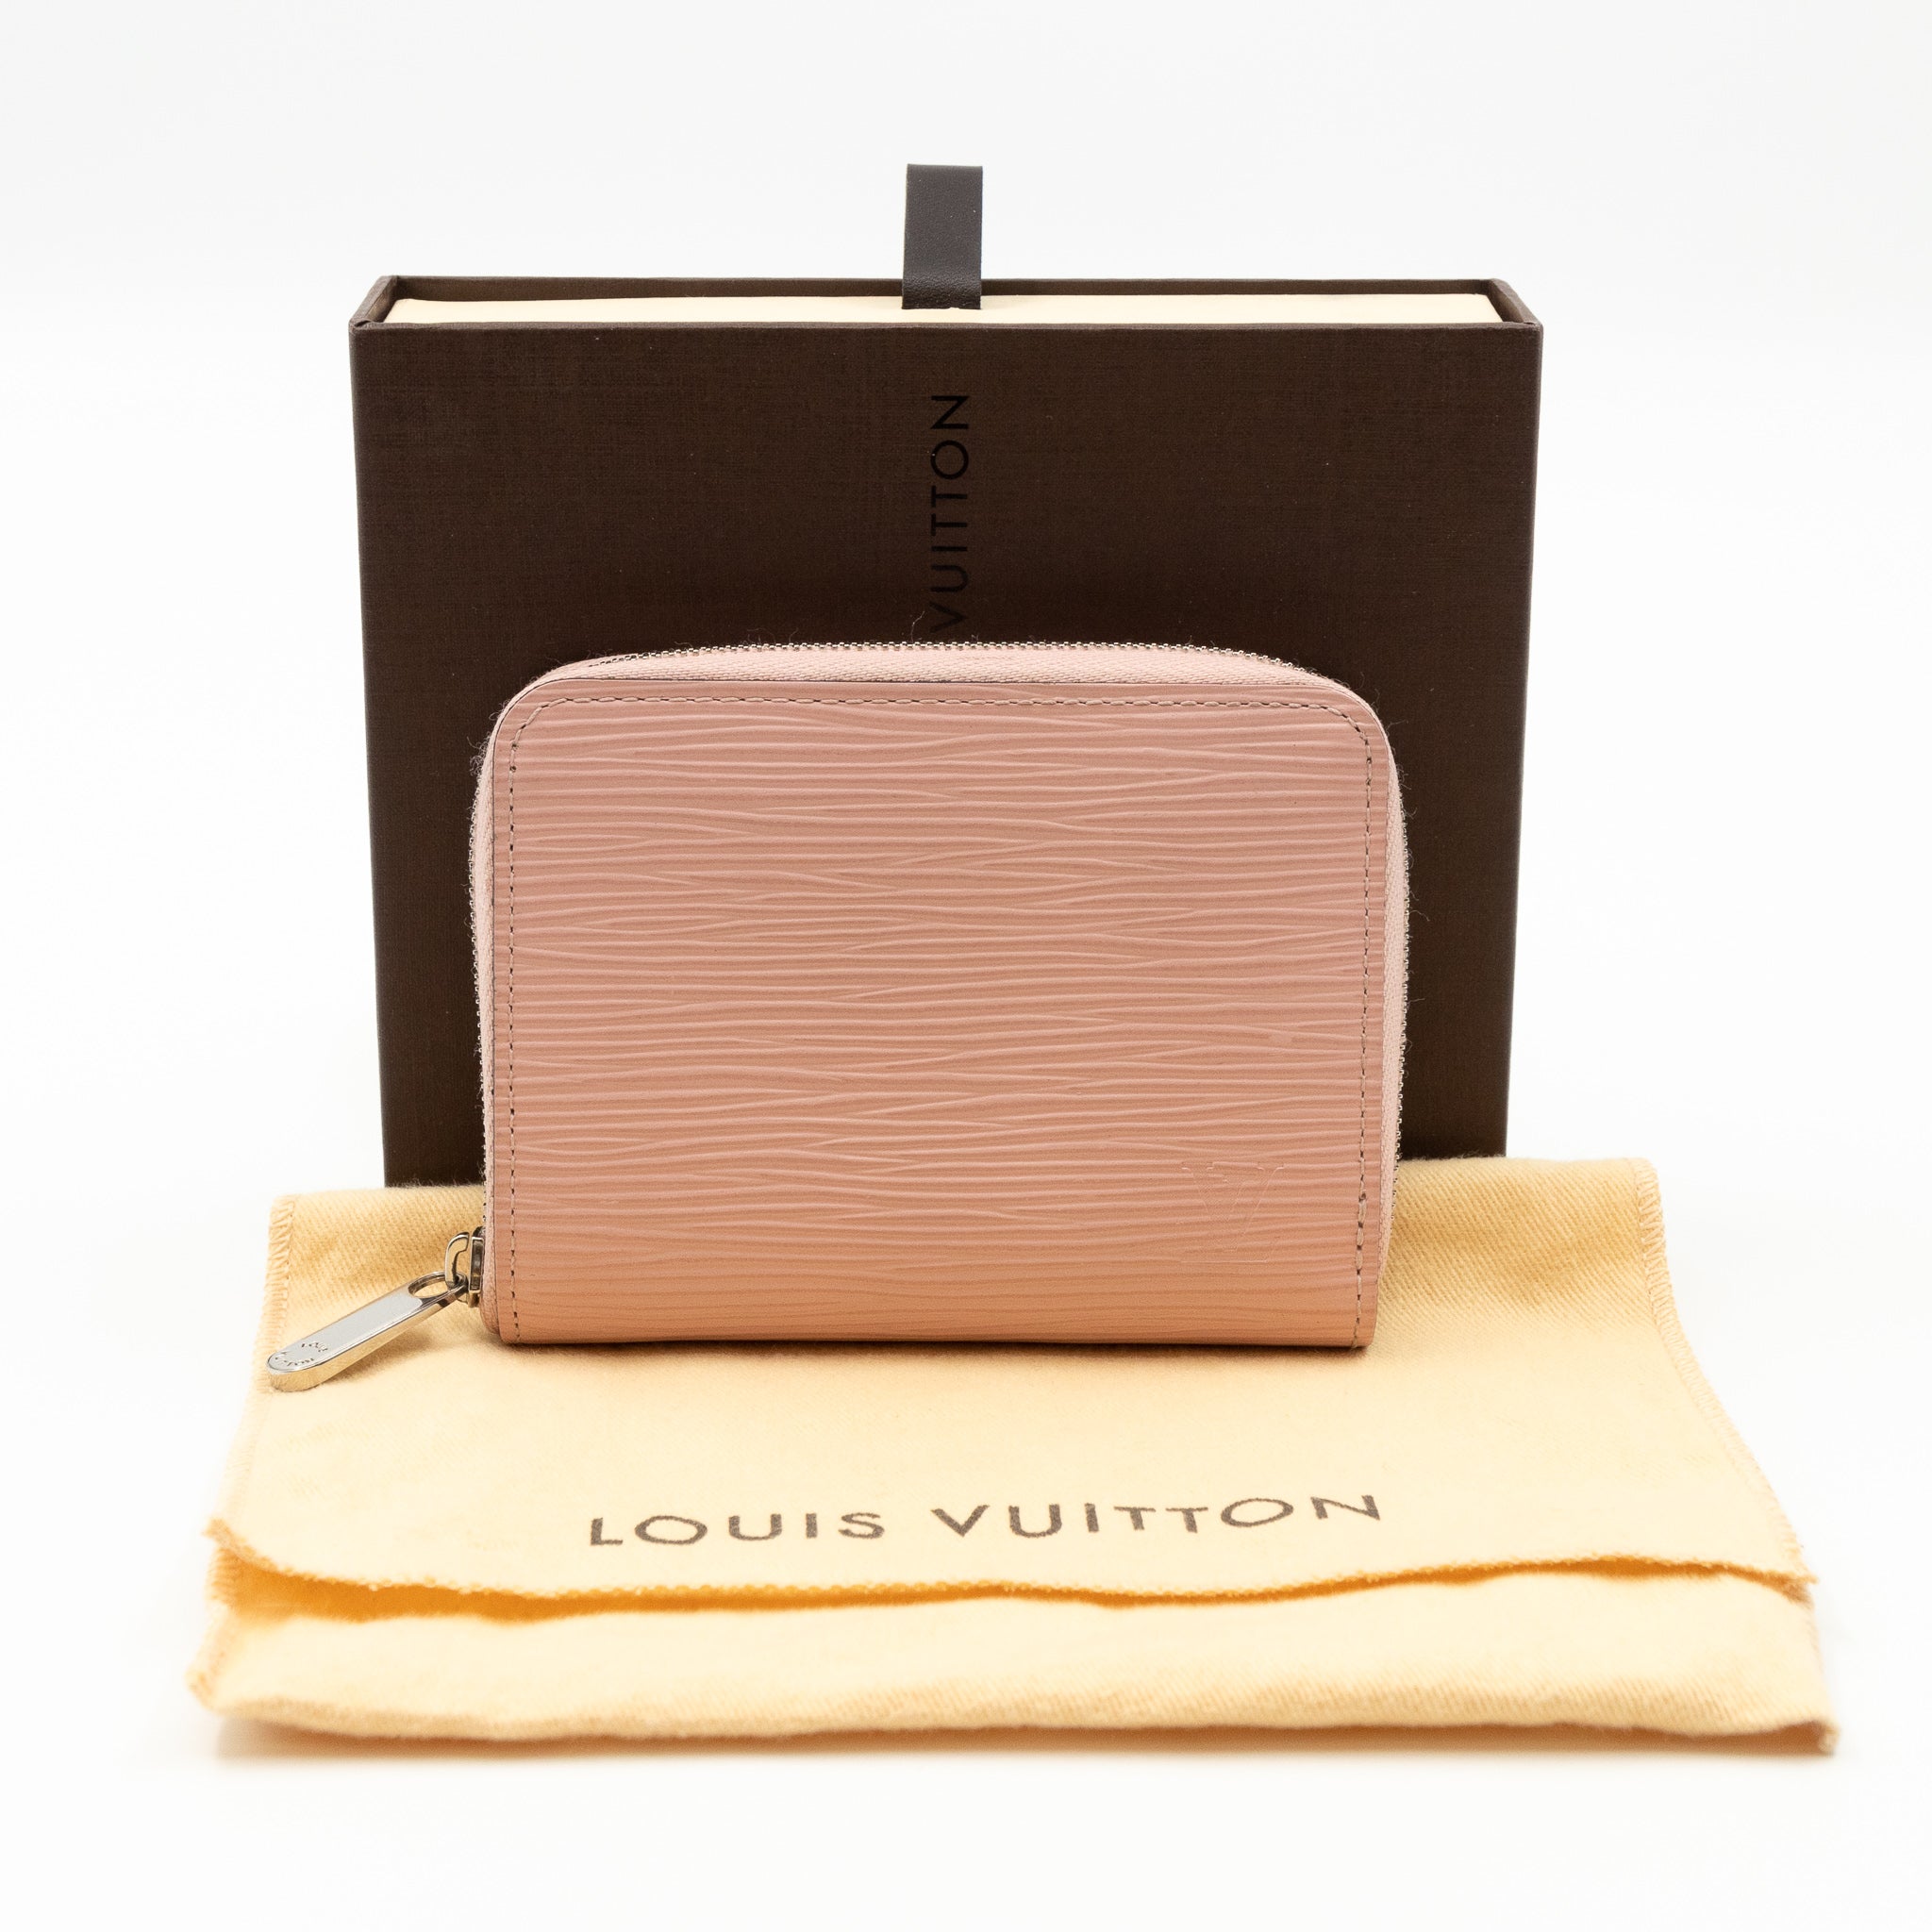 Buy Louis Vuitton Epi LOUIS VUITTON Zippy Coin Purse Epi M63723 Coin Case LV  Stories Rose Ballerine / 083763 [Used] from Japan - Buy authentic Plus  exclusive items from Japan